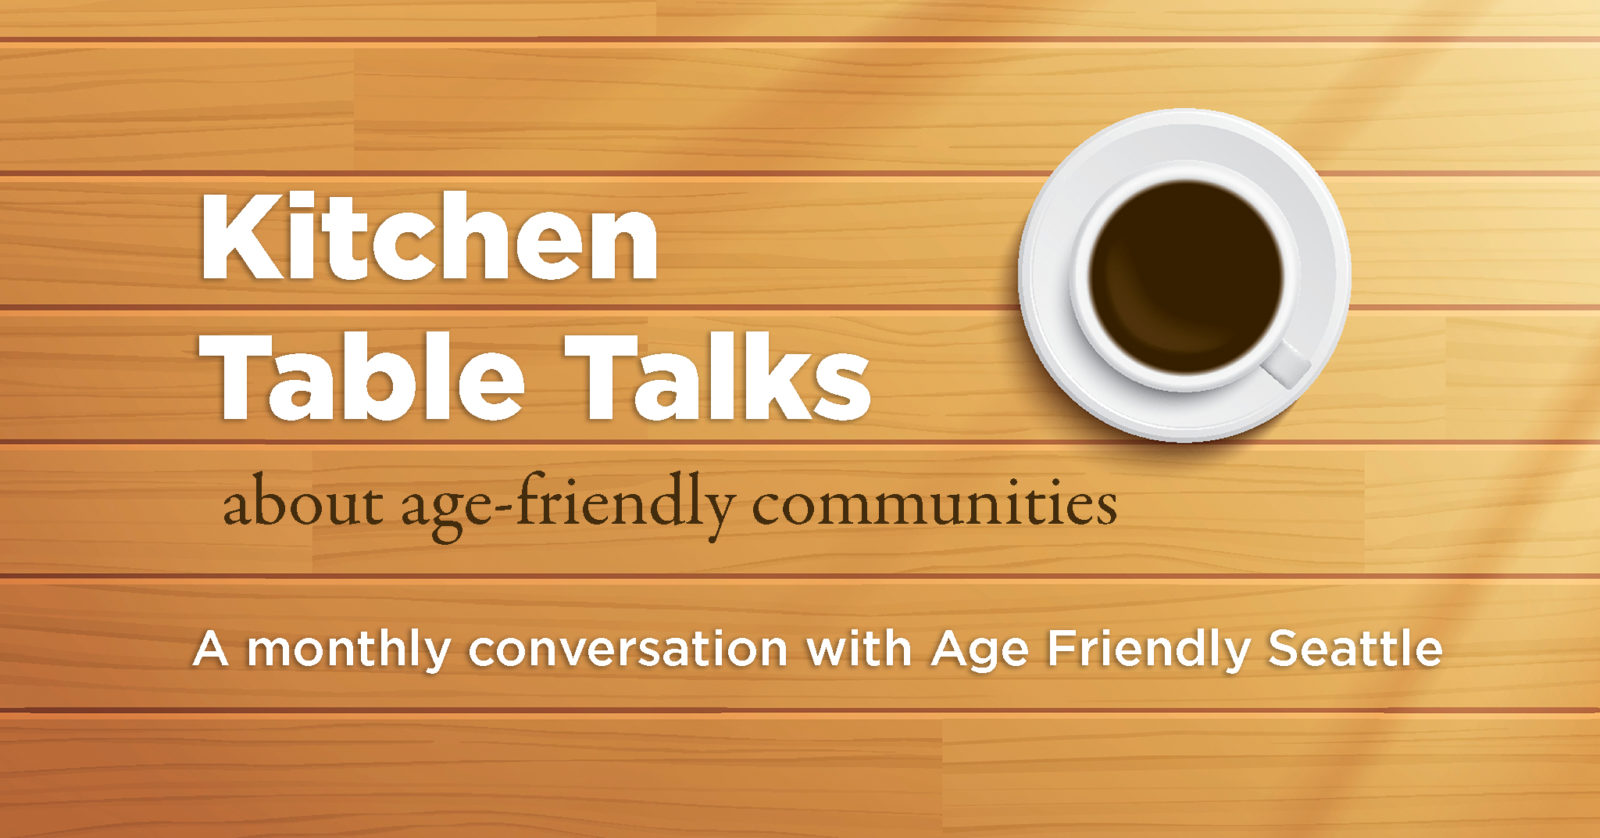 Image of a golden brown wooden table and a cup of black coffee in a white coffee cup. The words read "Kitchen Table Talks about age-friendly communities, a monthly conversation with Age Friendly Seattle"